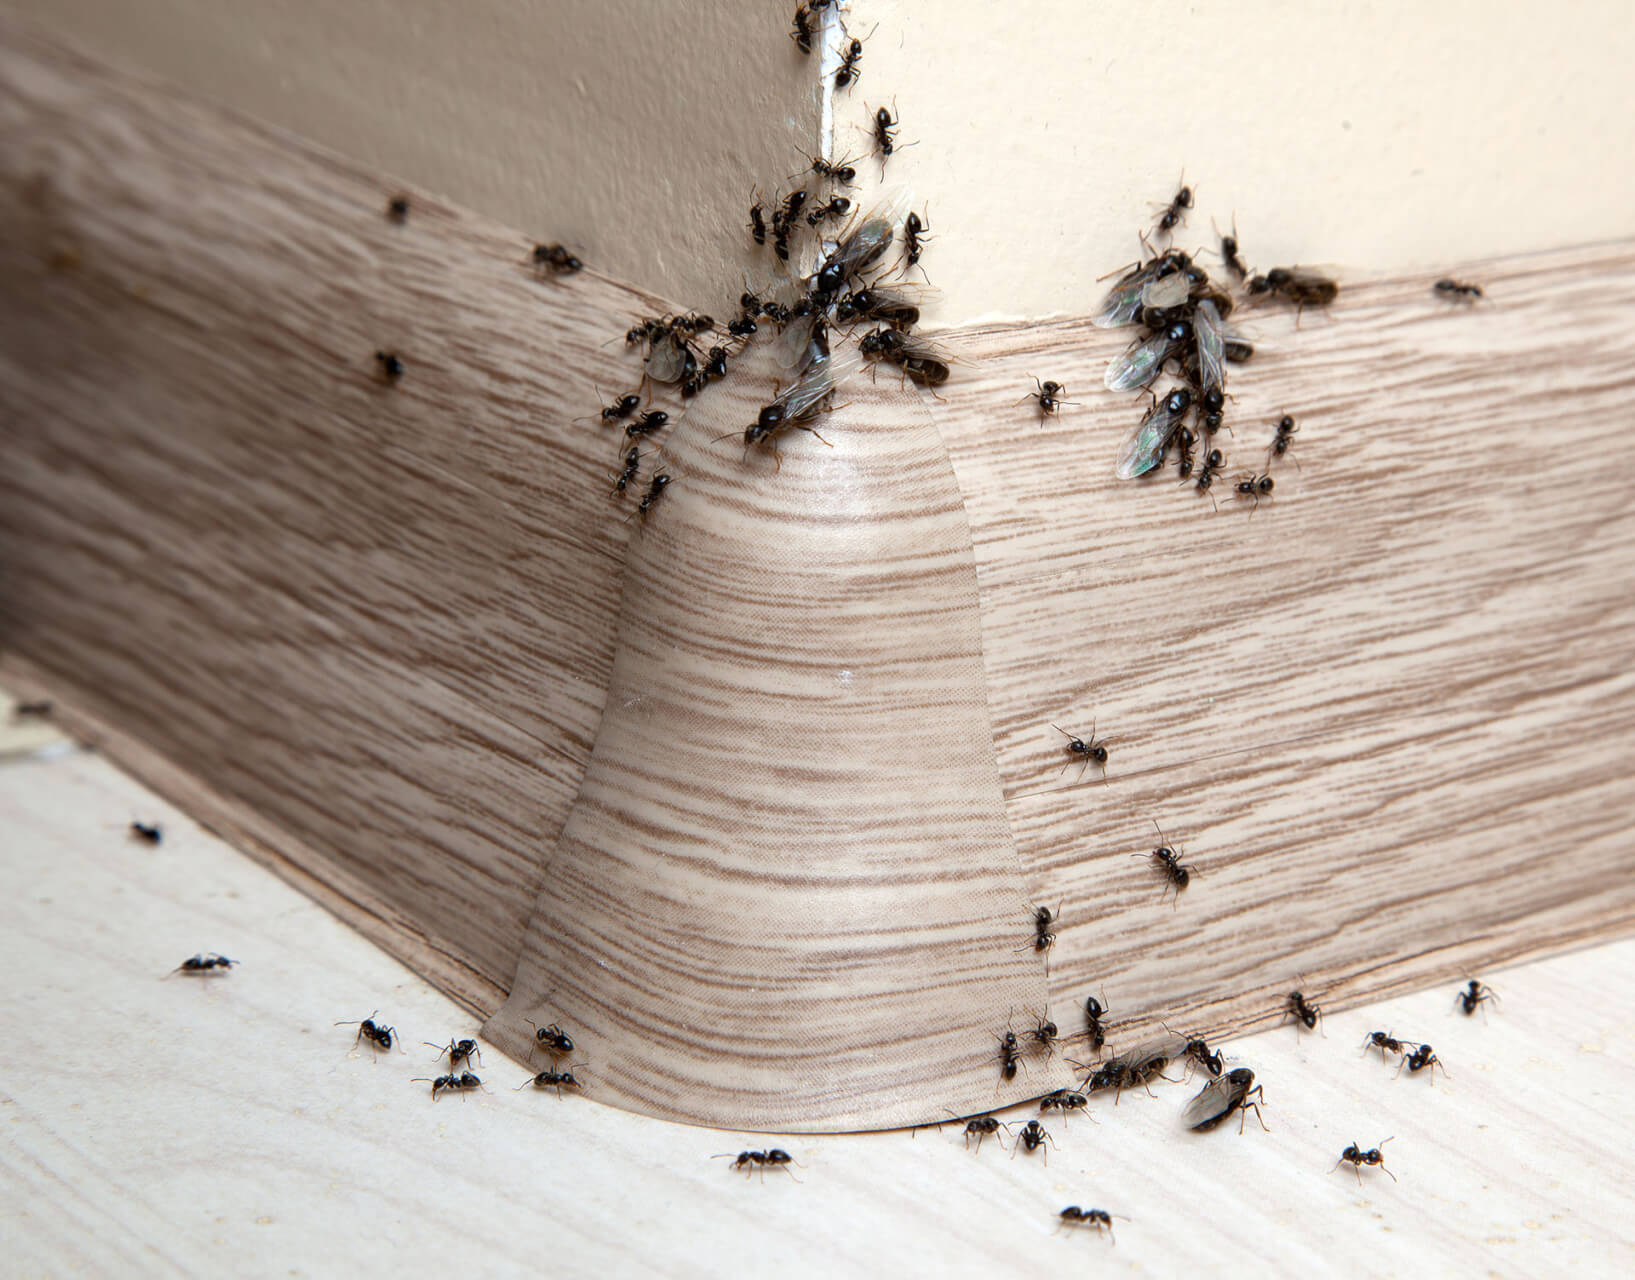 Pest Control Lewisville pest control services in Lewisville Denton or nearby cities in Denton County GA ants 1